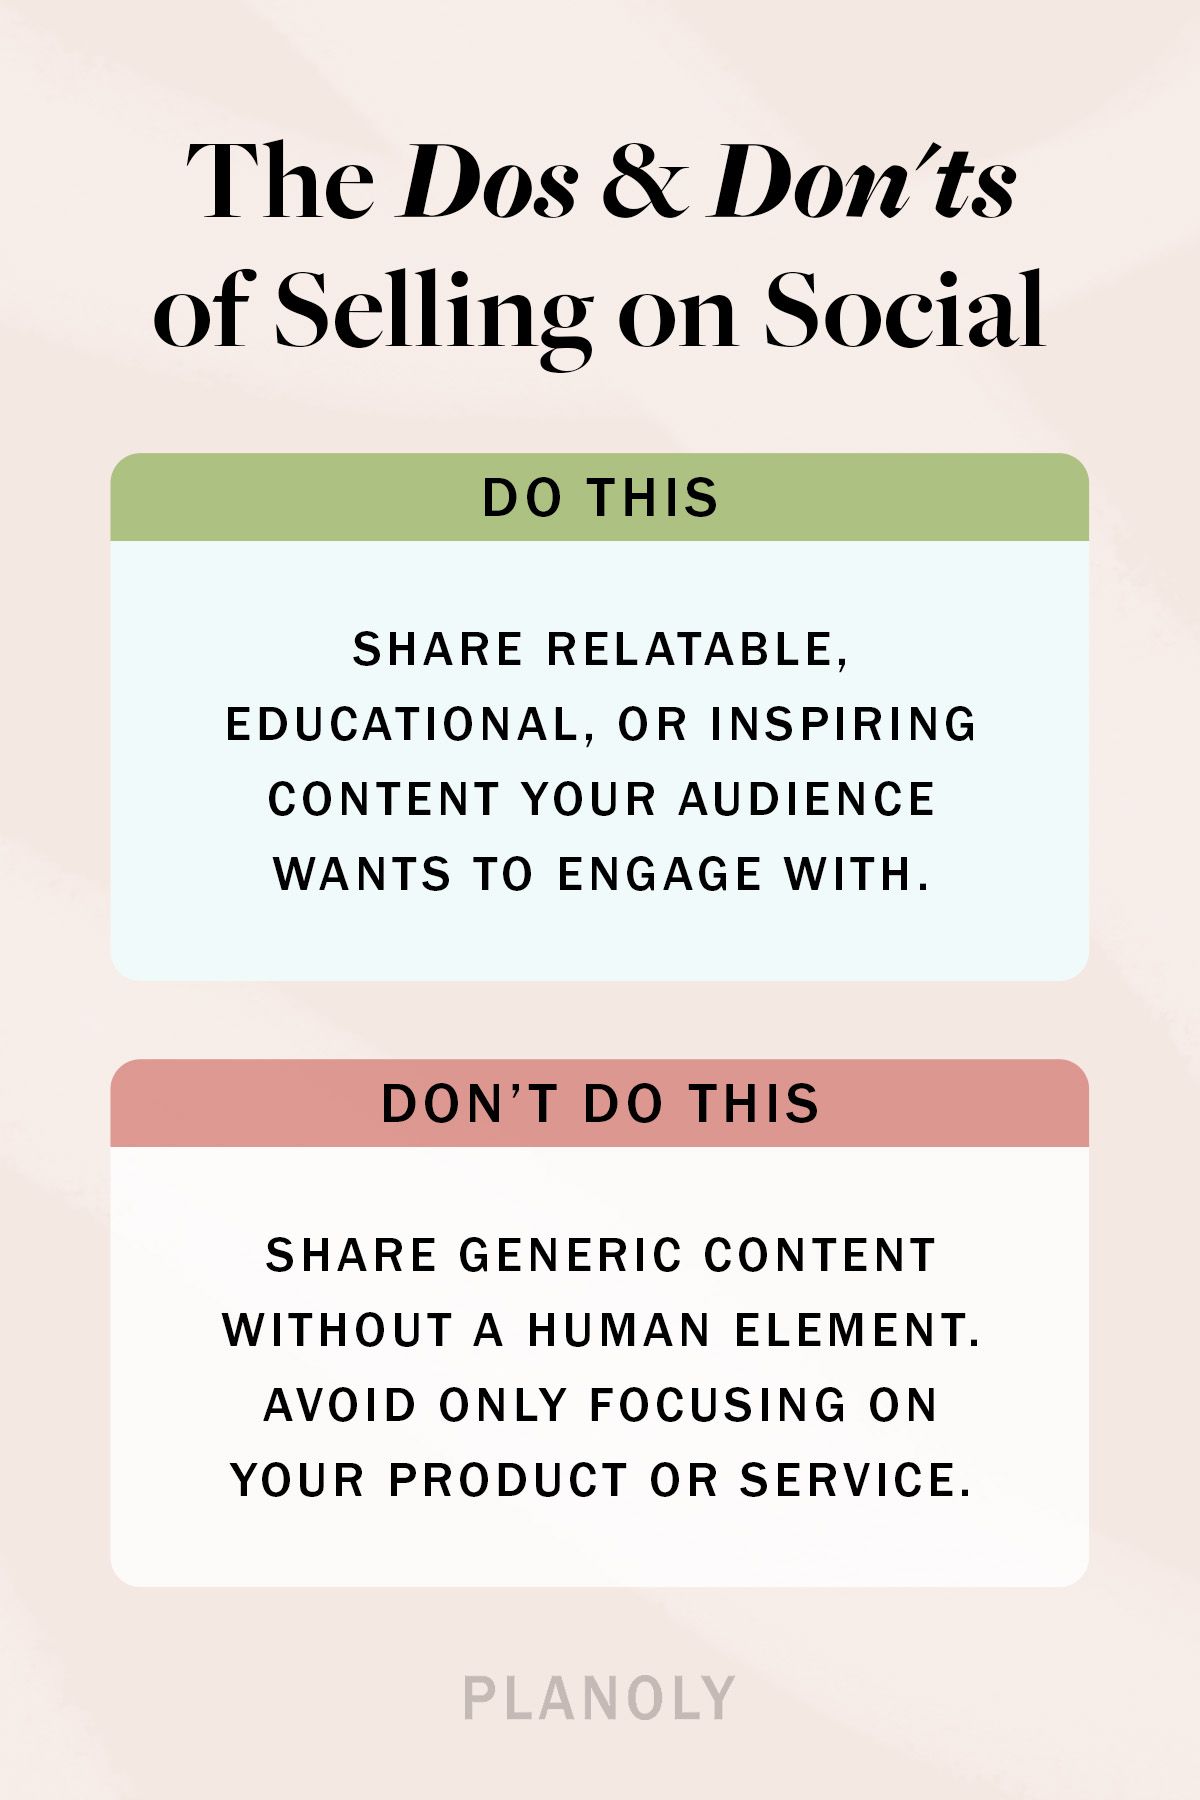 How_to_Use_Social_Selling_as_a_Small_Business_BlogVertical